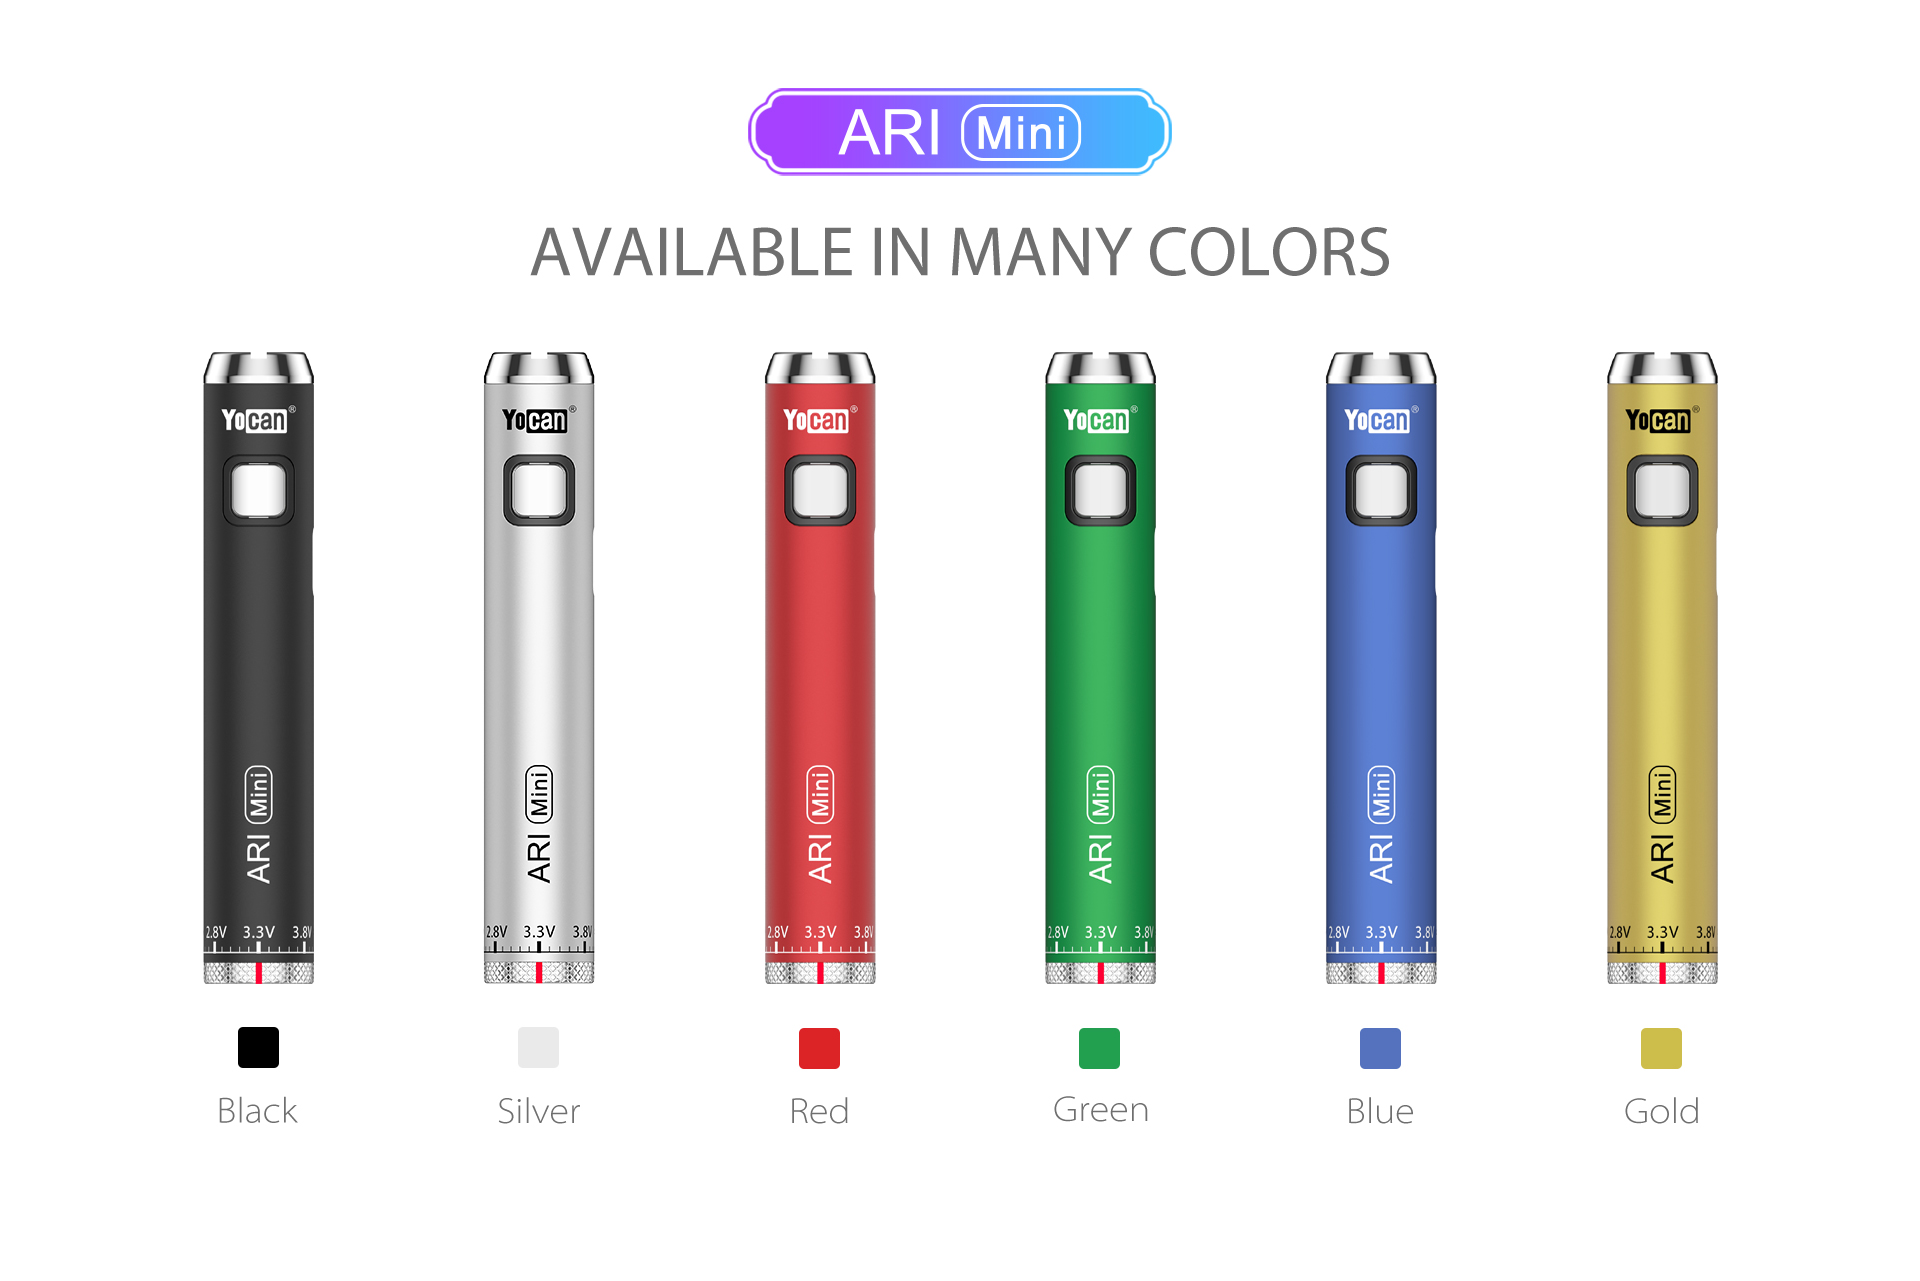 Yocan ARI Mini Variable Voltage Vape Battery available in 6 colors.